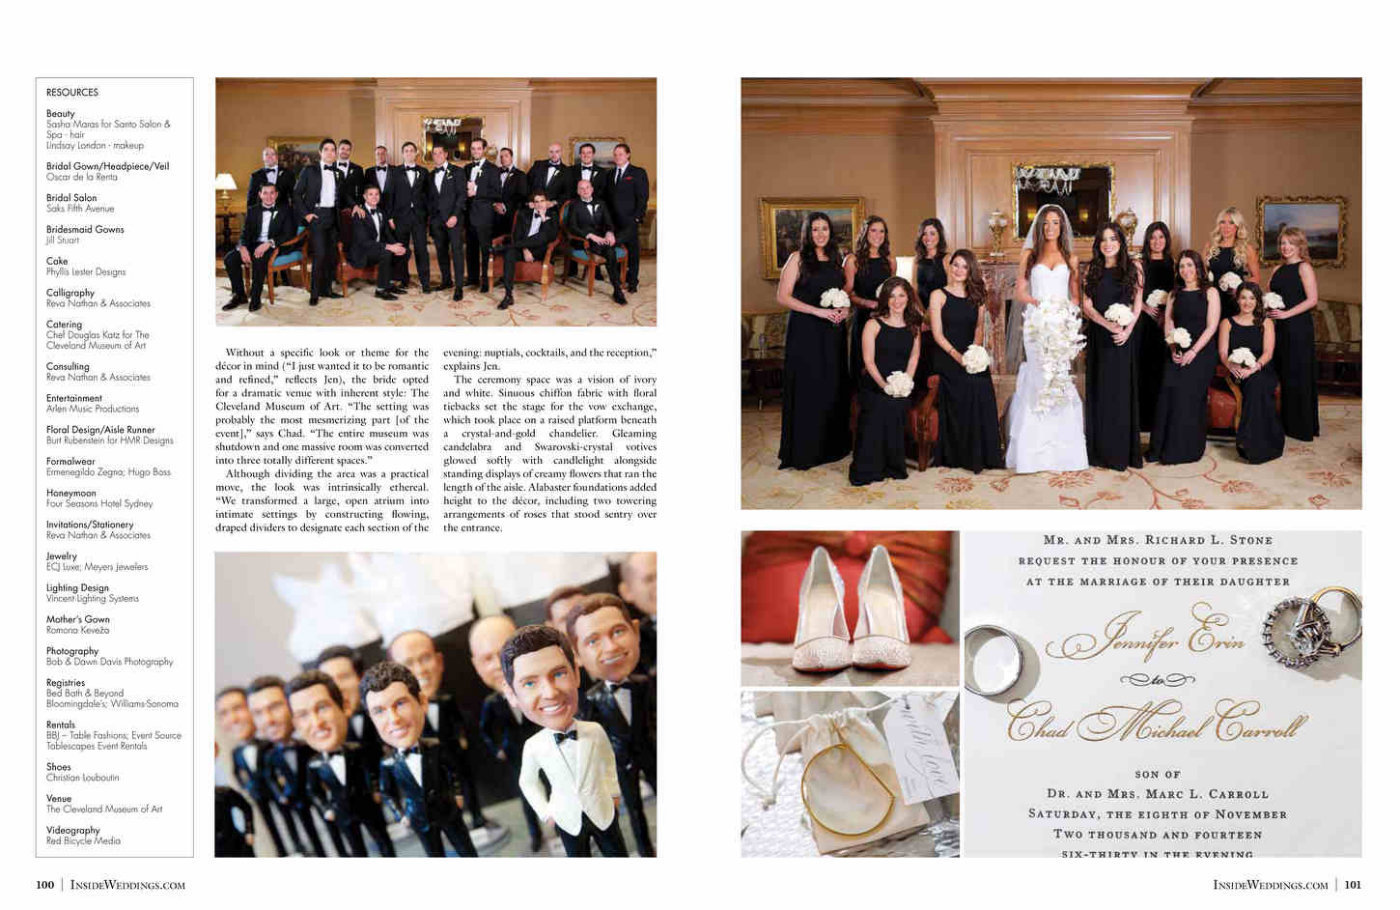 Thank you to the team at Inside Weddings for selecting Jen and Chad's wedding to feature in the Fall 2015 edition. We're always so grateful to the Publishers Walt and Art, and Editor, Nicole. Thank you Reva Nathan & Associates who planned this wedding and HMR Designs who brought it all together at The Cleveland Museum of Art in Ohio. Chad proposed to Jen on his Bravo TV Show Million Dollar Listing Miami, he's not shy at all. Click here for a list of vendors.